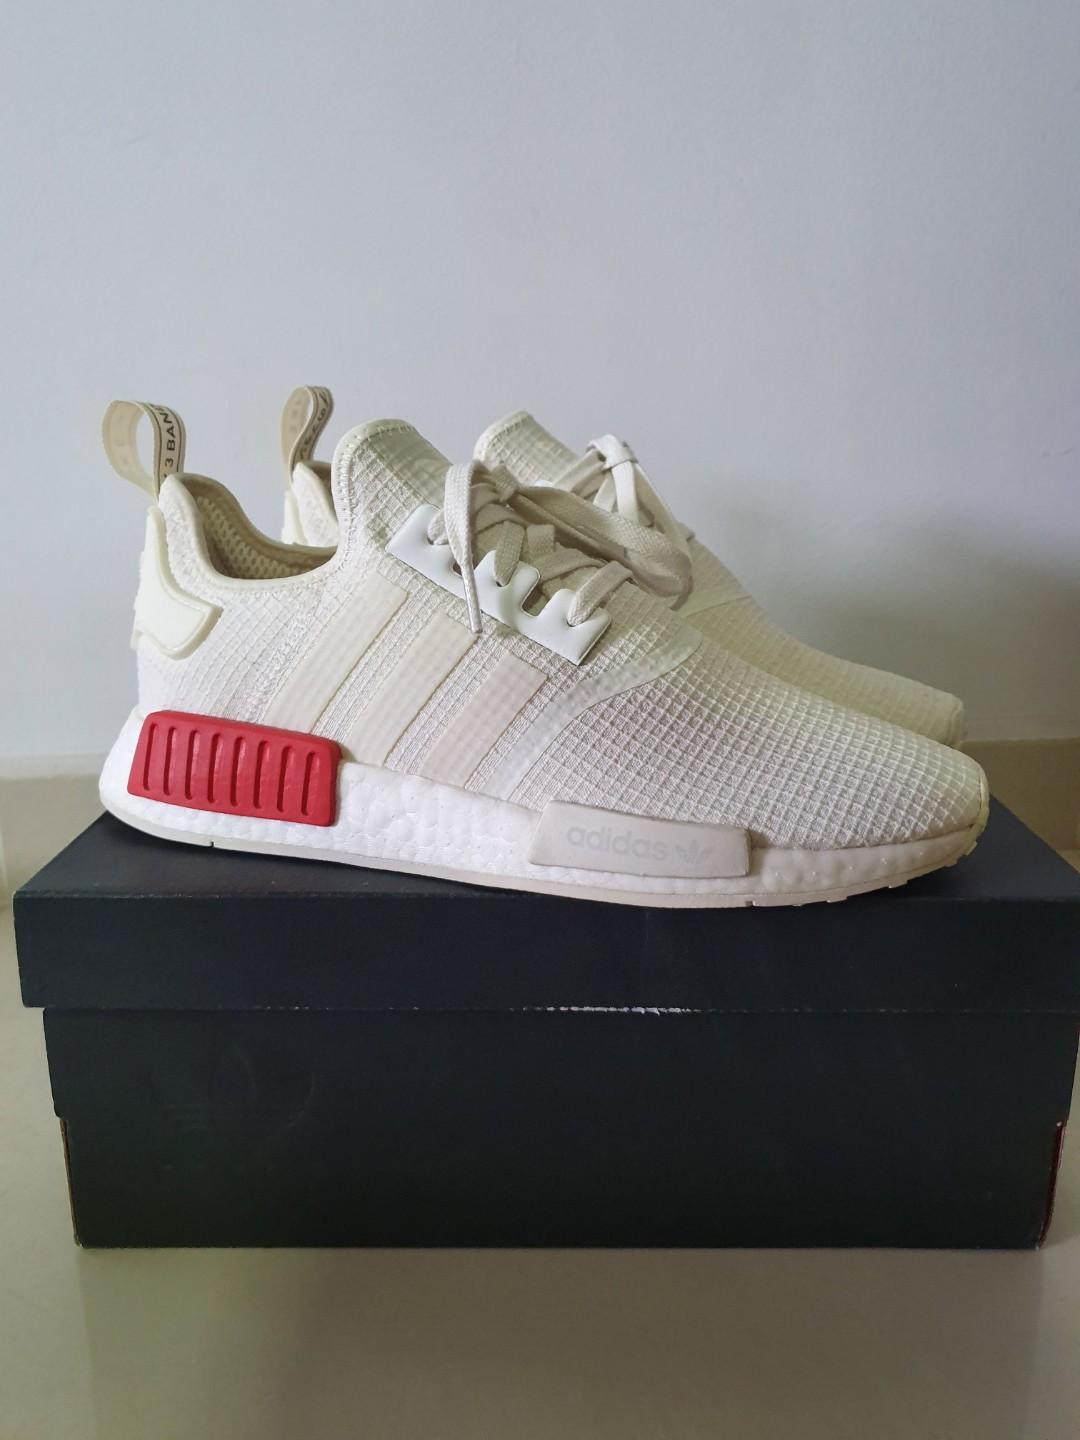 Adidas NMD R1 Lush Red Spider Maze Shoes s79385 ebay